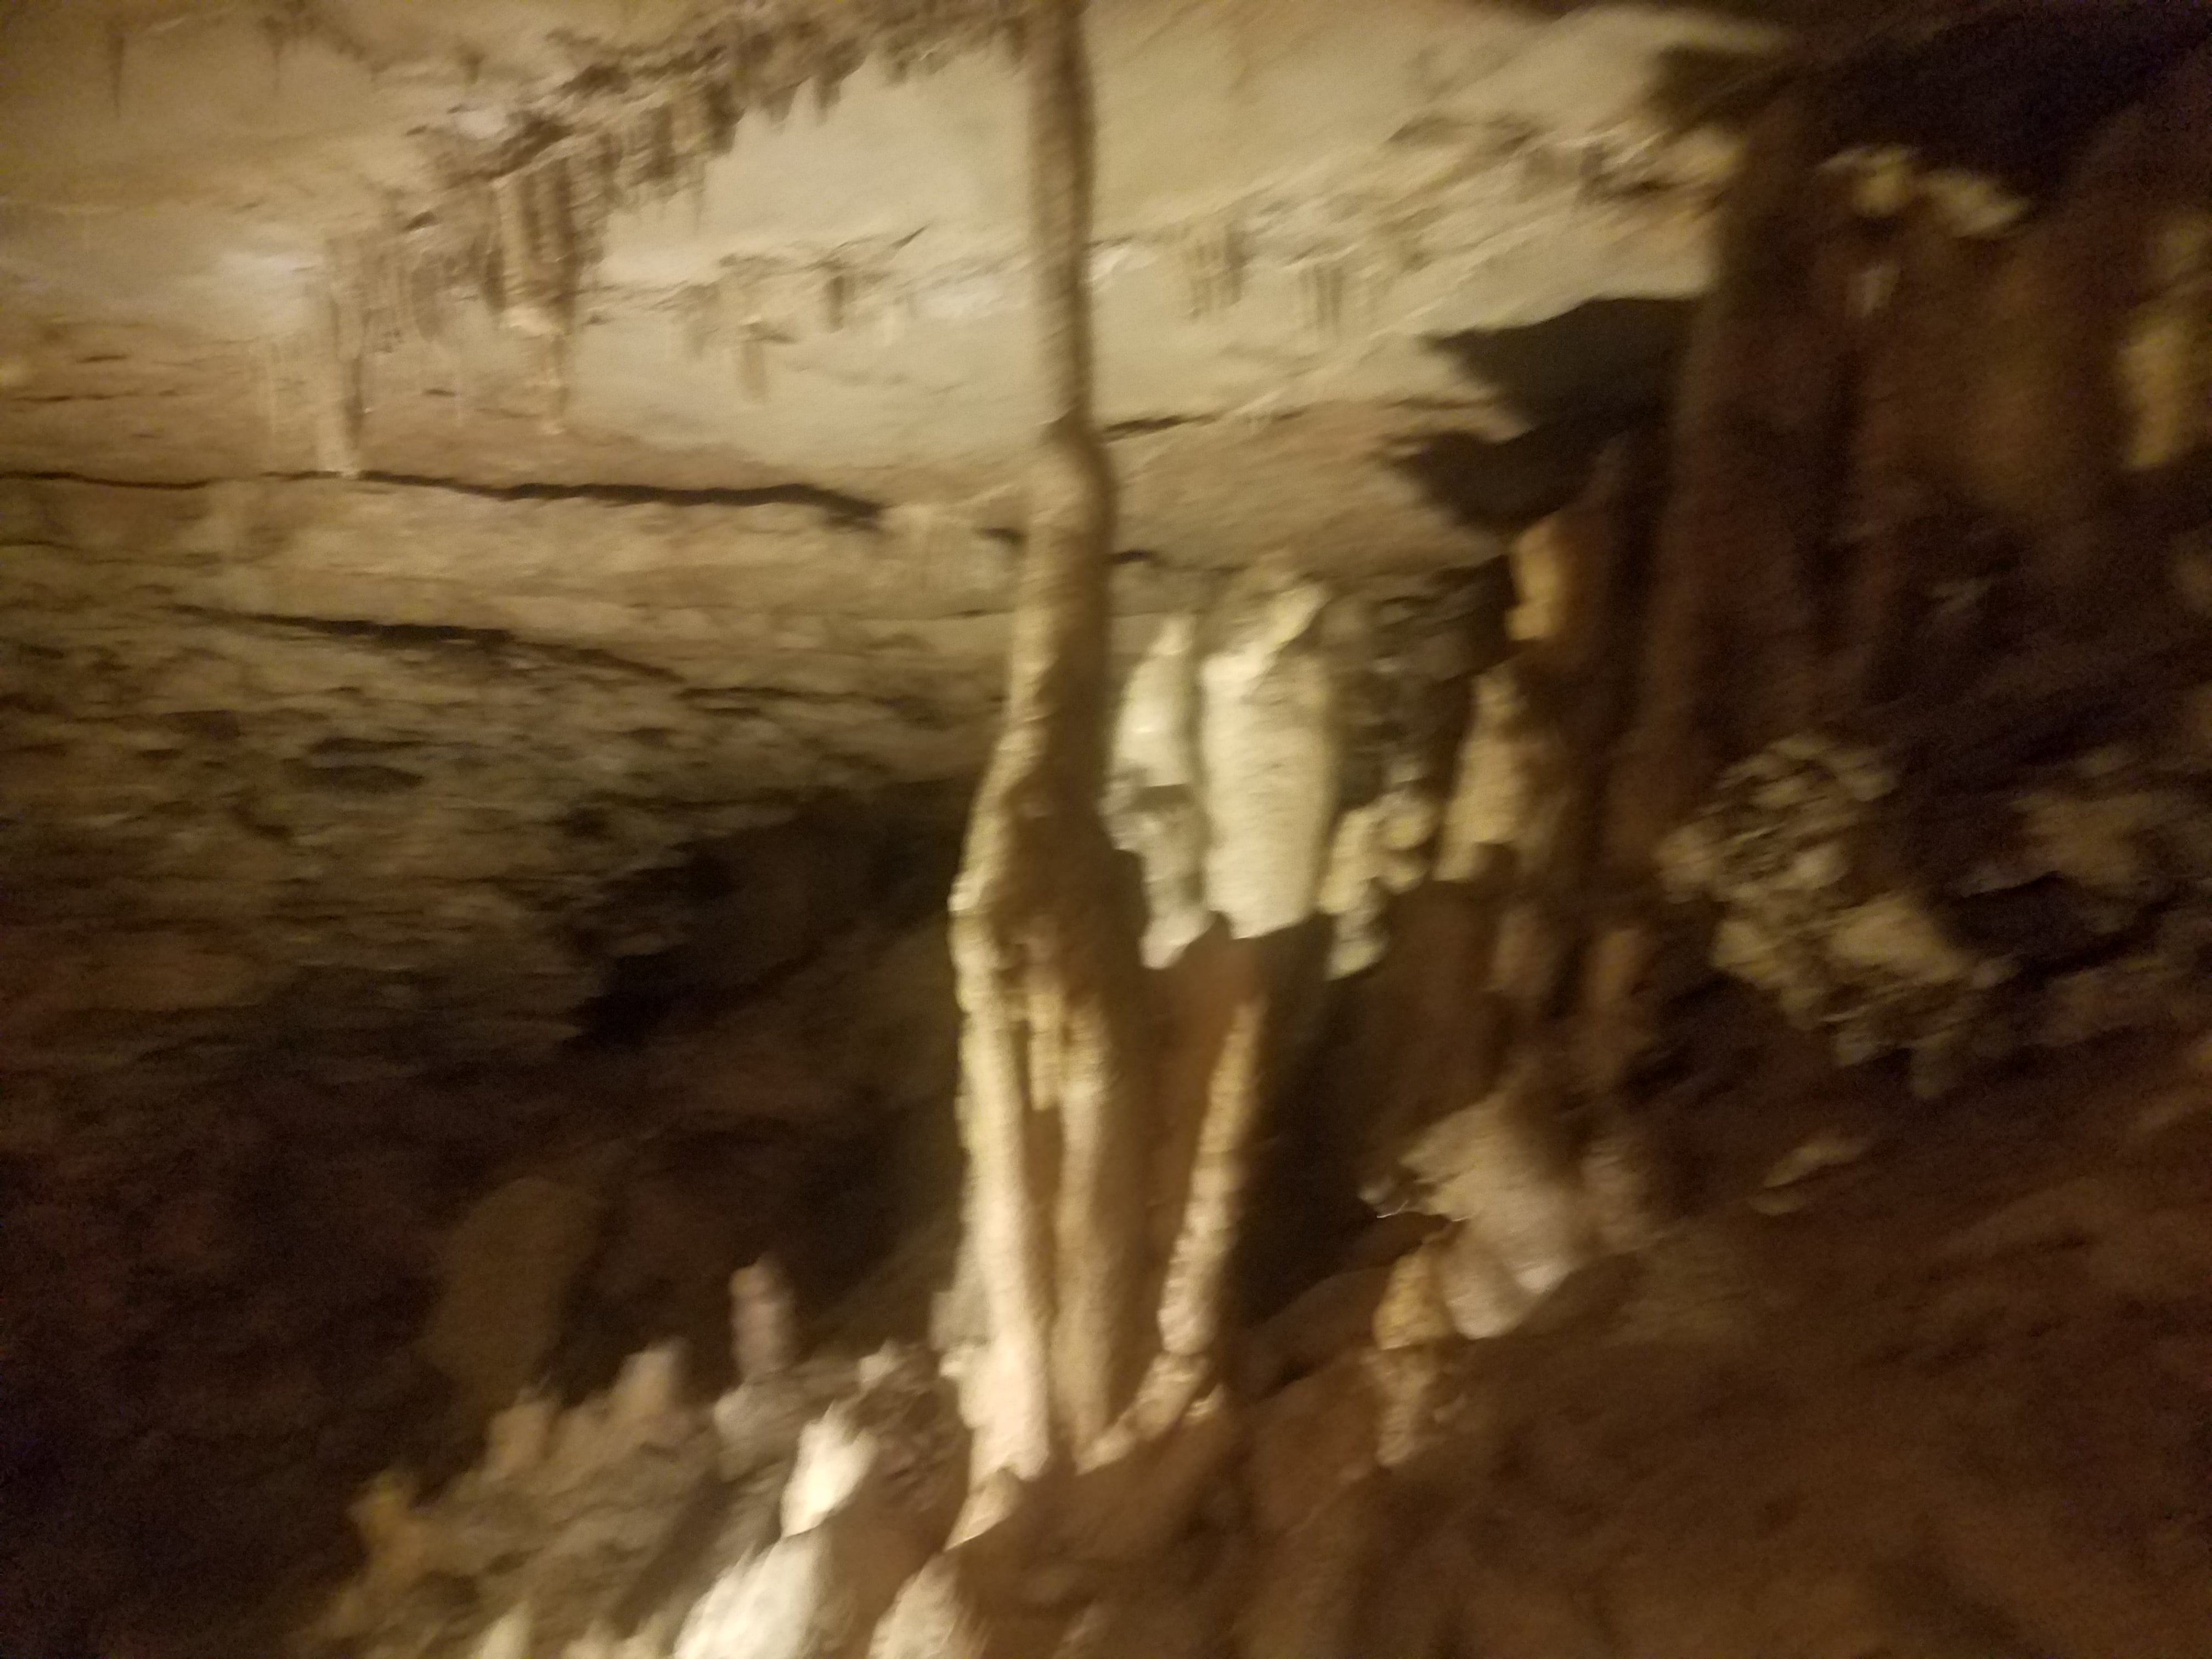 Nearby caves